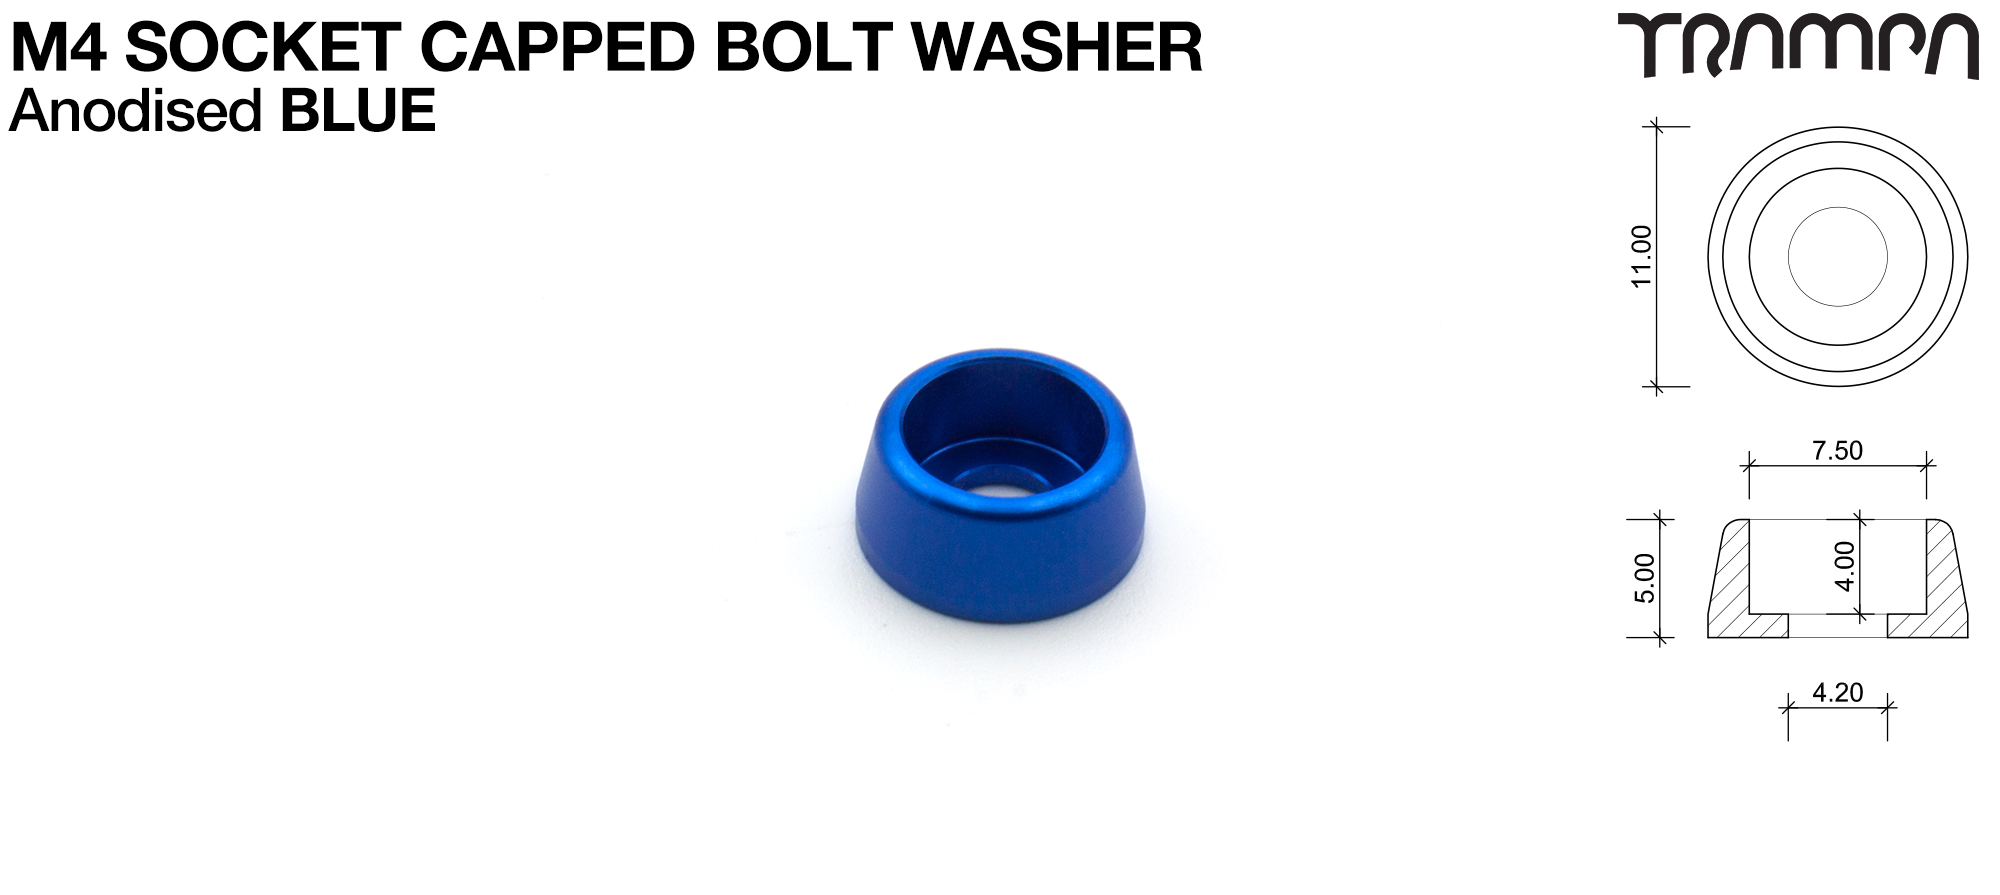 M4 Socket Capped Washer - Anodised BLUE